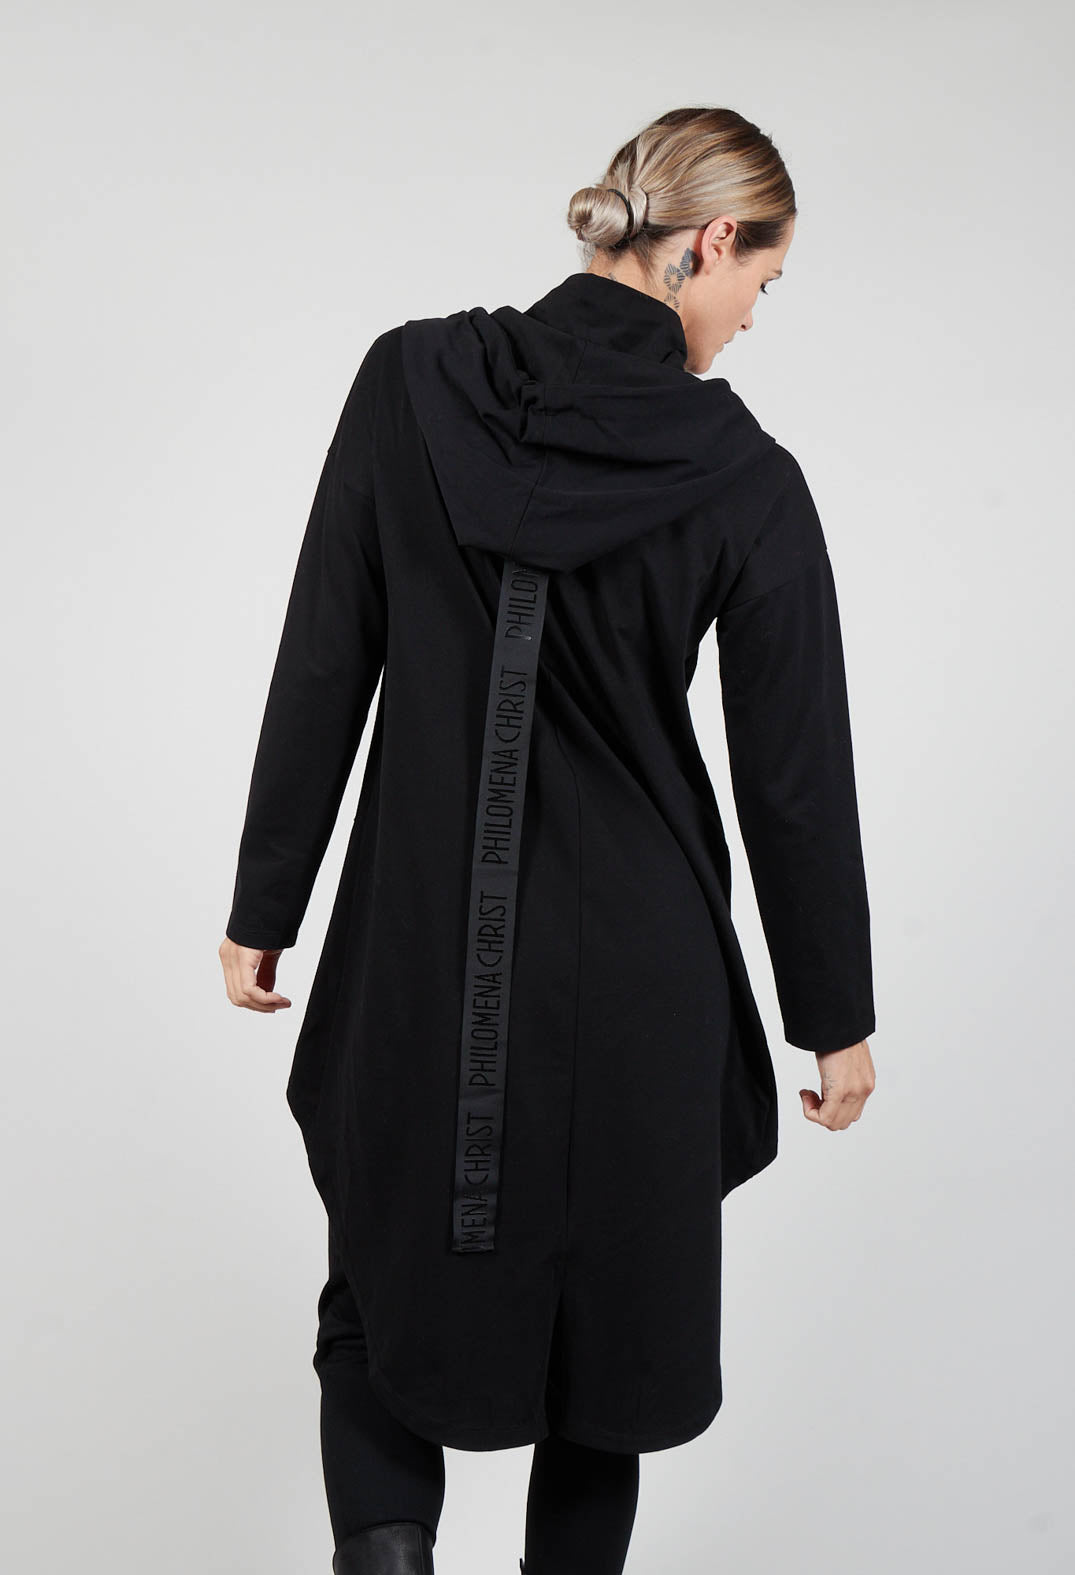 Hooded Jersey Tunic in Black